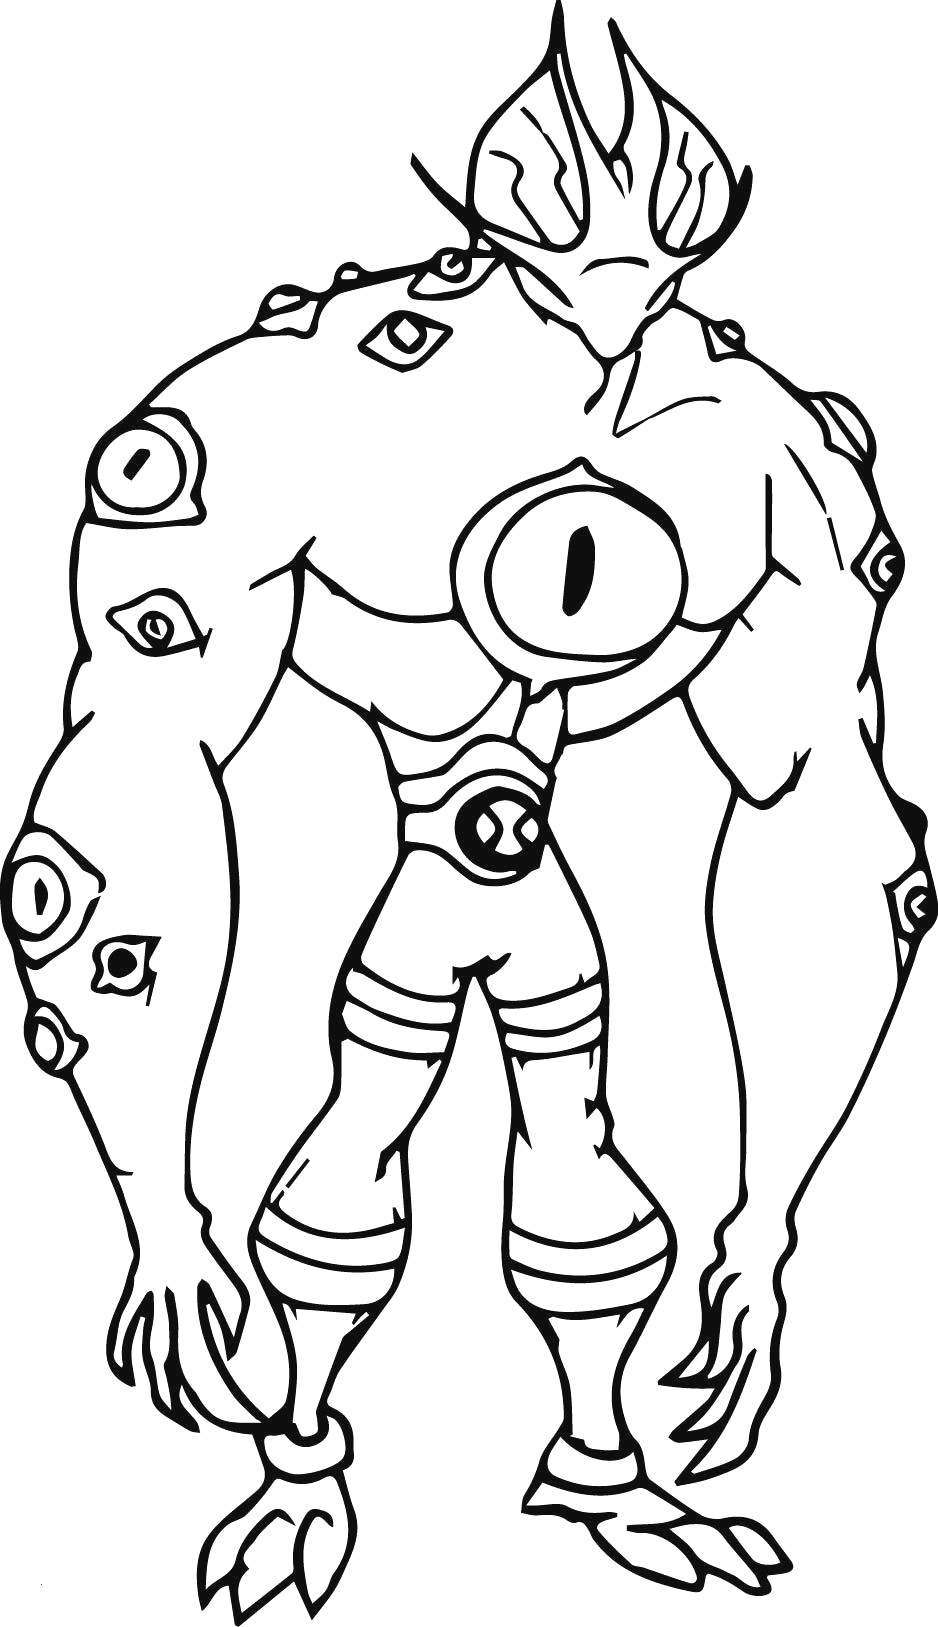 Ben 10 Coloring Pages Online Coloring Fantastic Benolouring Gamesoloring Pages Of Printable